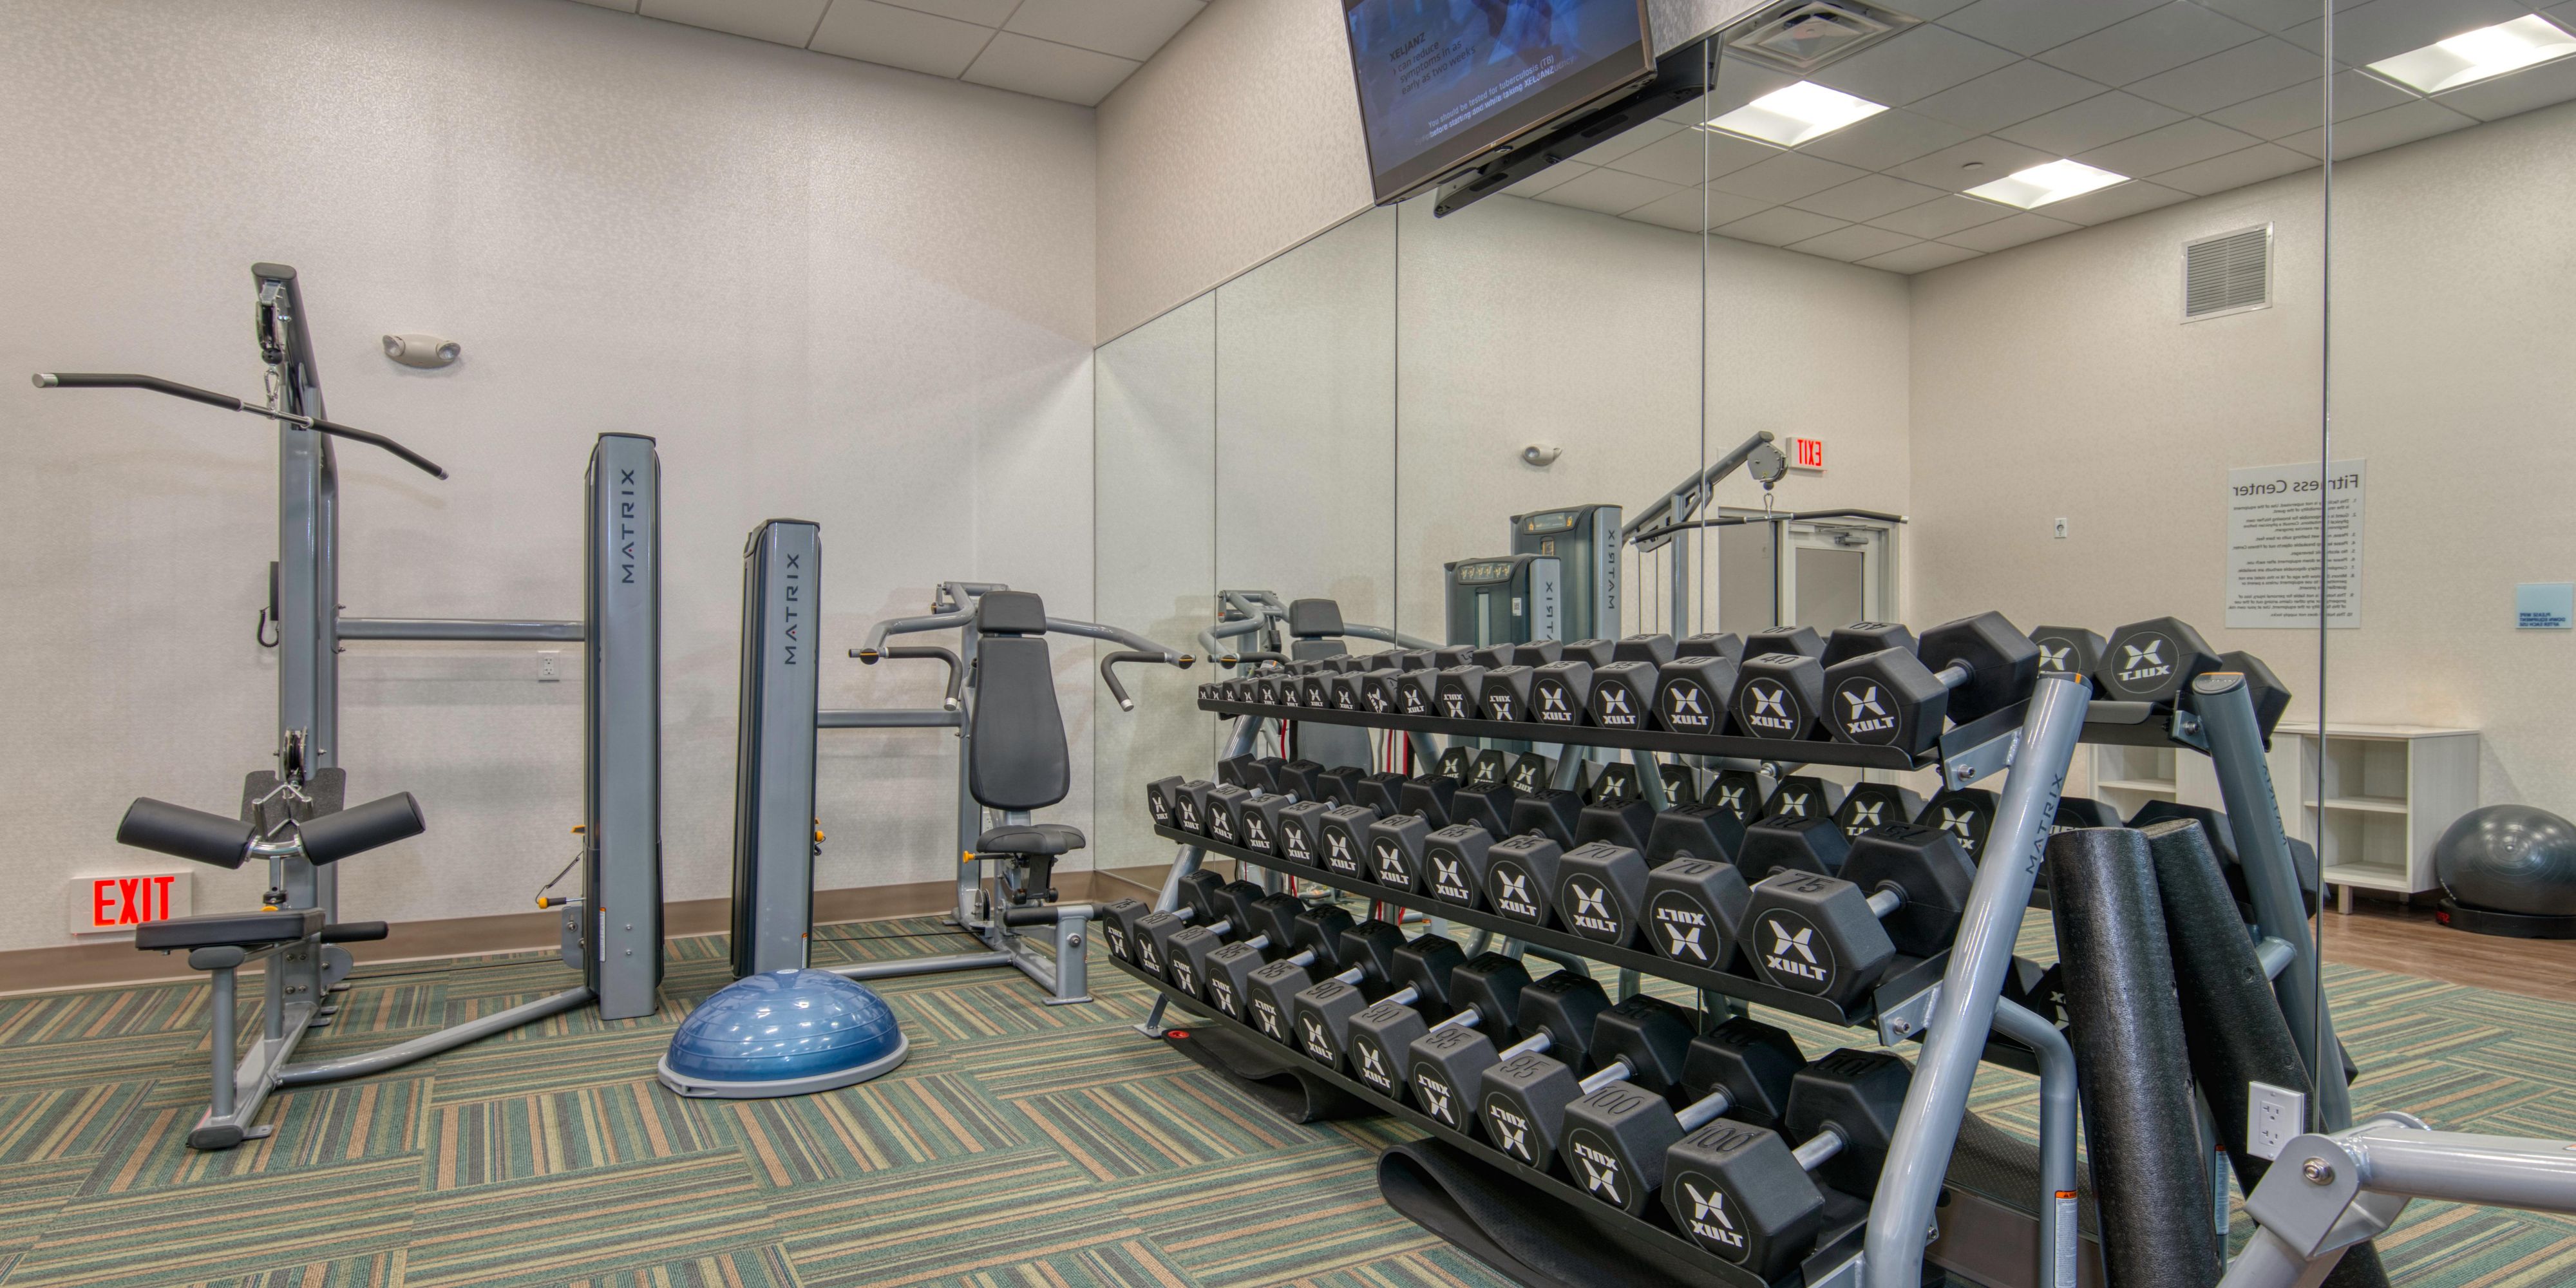 THE FITNESS CENTER IS OPEN!
Sprint, stretch, lift and pump – day or night. We also have stationary bikes, treadmills and elliptical machines – all the tools to keep you fit!